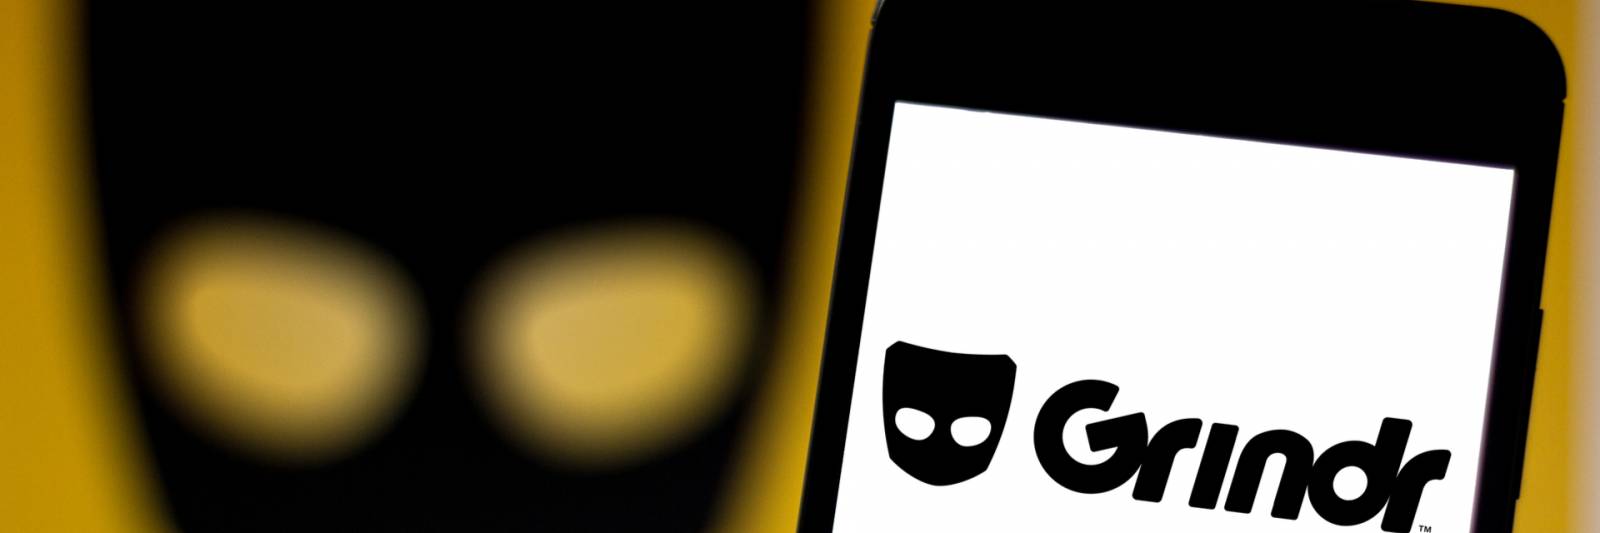 Grindr Hit With £8.6 Million Fine For Gdpr Consent Breach